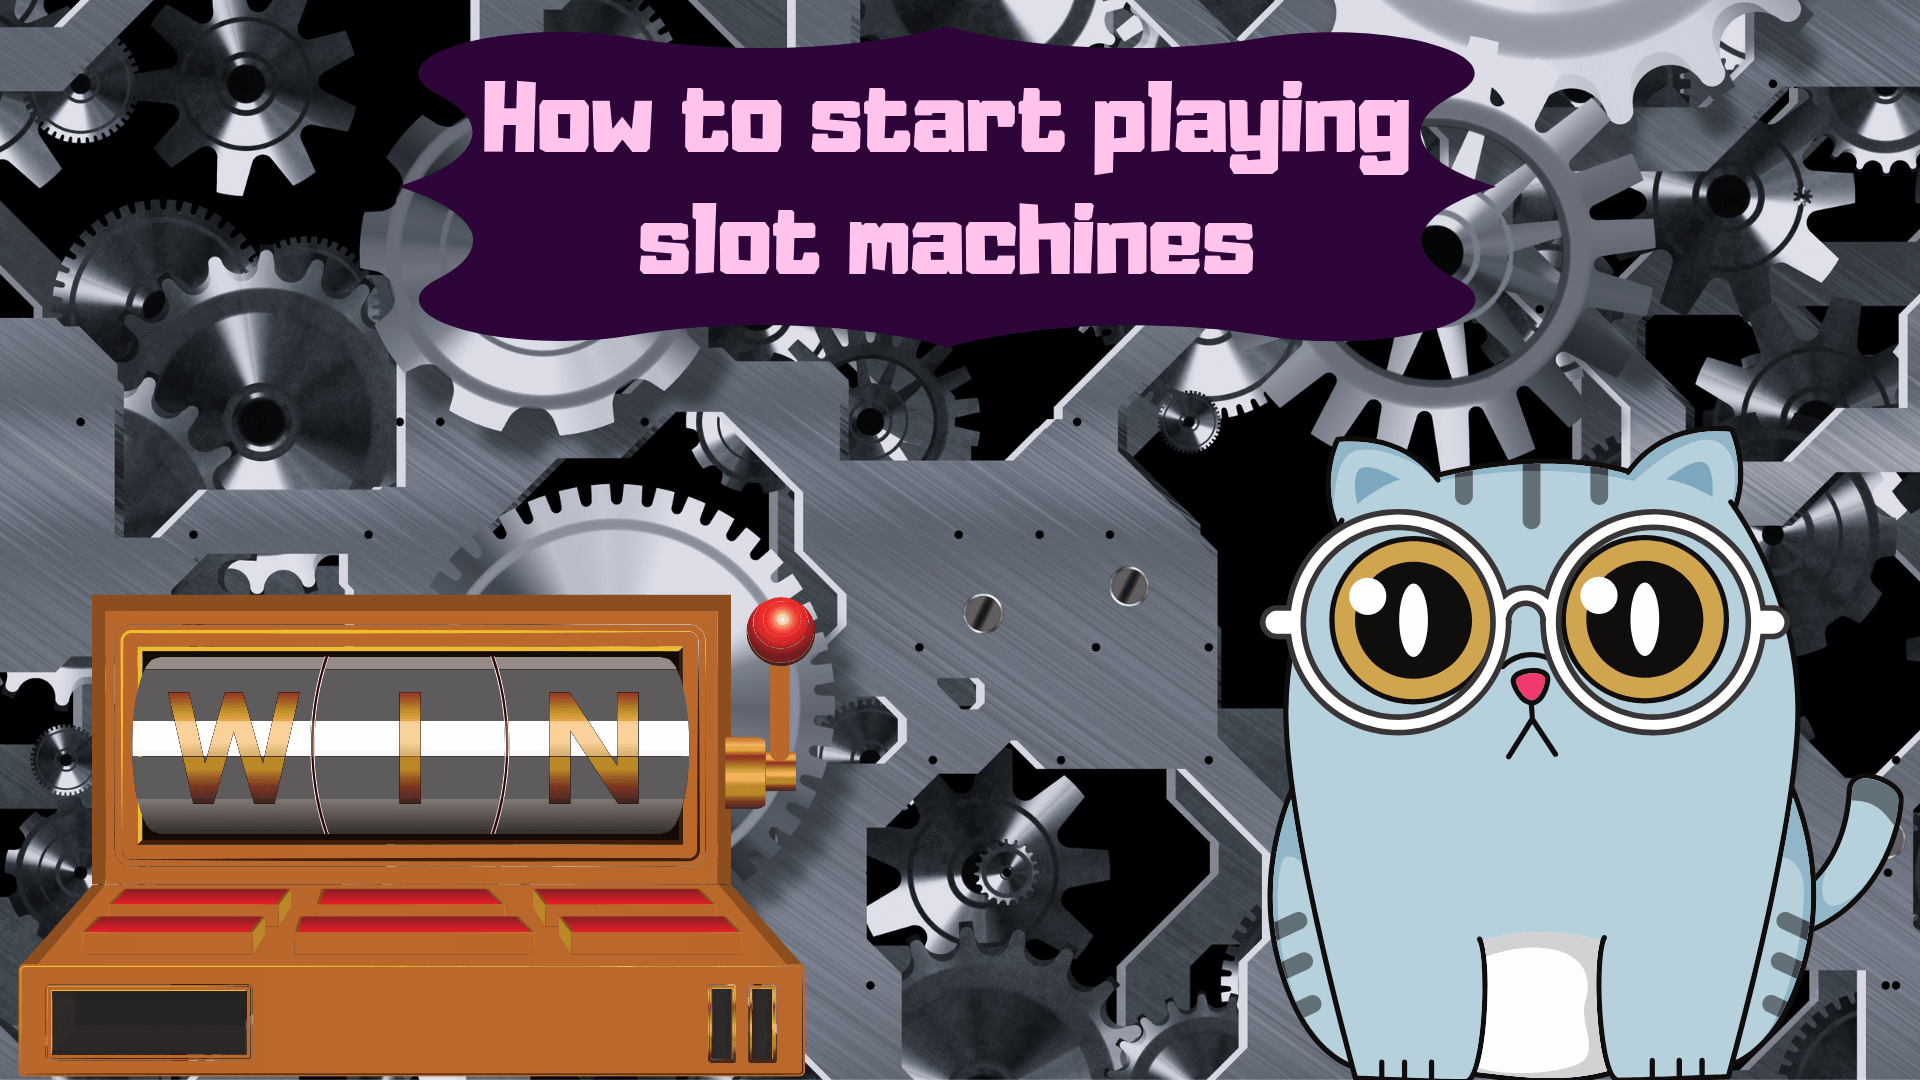 How to start playing slot machines background